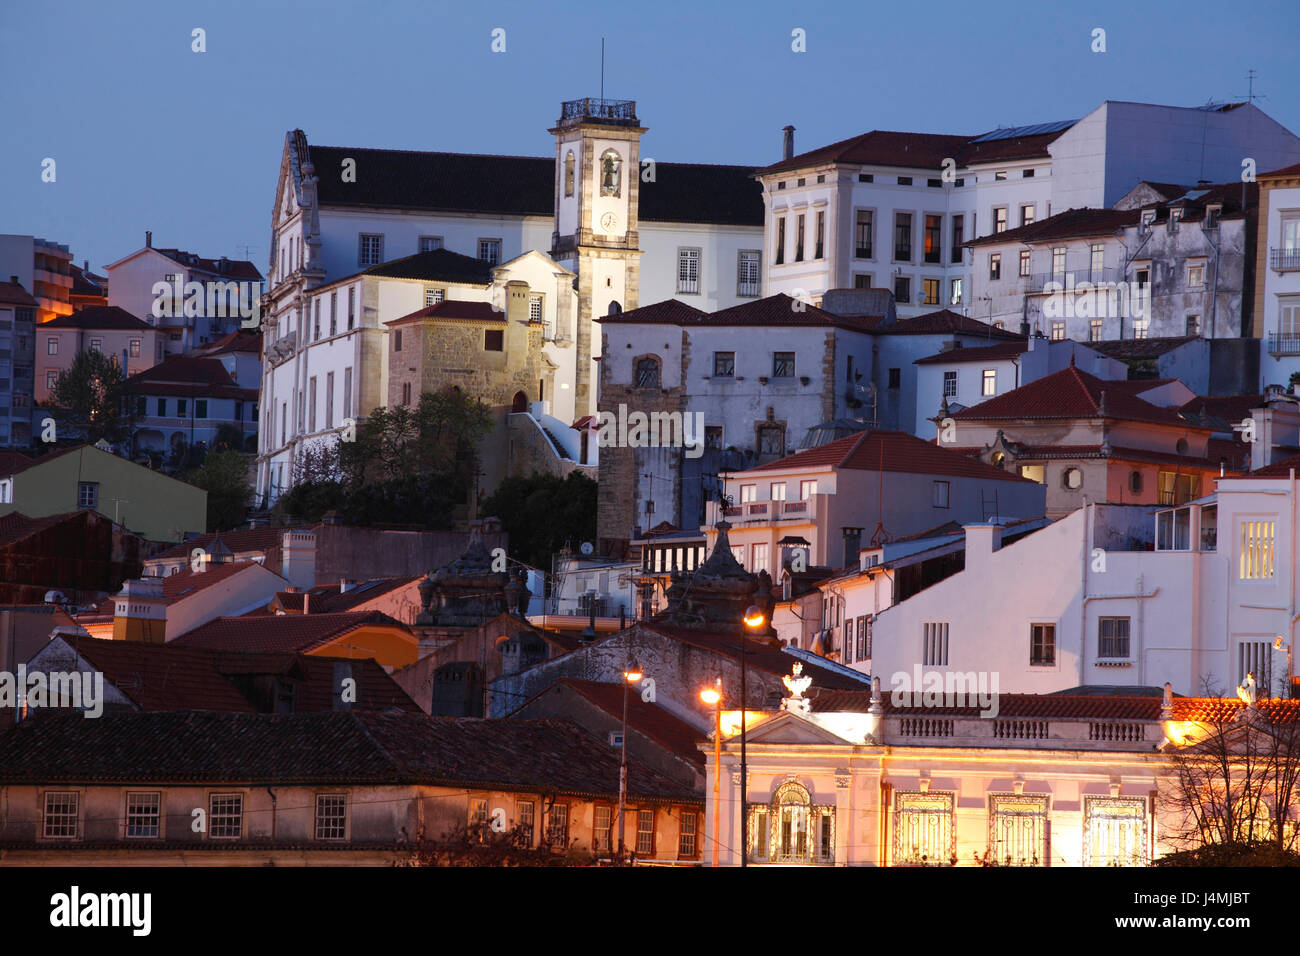 Old Town at dusk, Old Town, Coimbra, Portugal, Europe  I Altstadt, bei Abenddämmerung, Coimbra, Beira Litoral, Regio Centro, Portugal Stock Photo